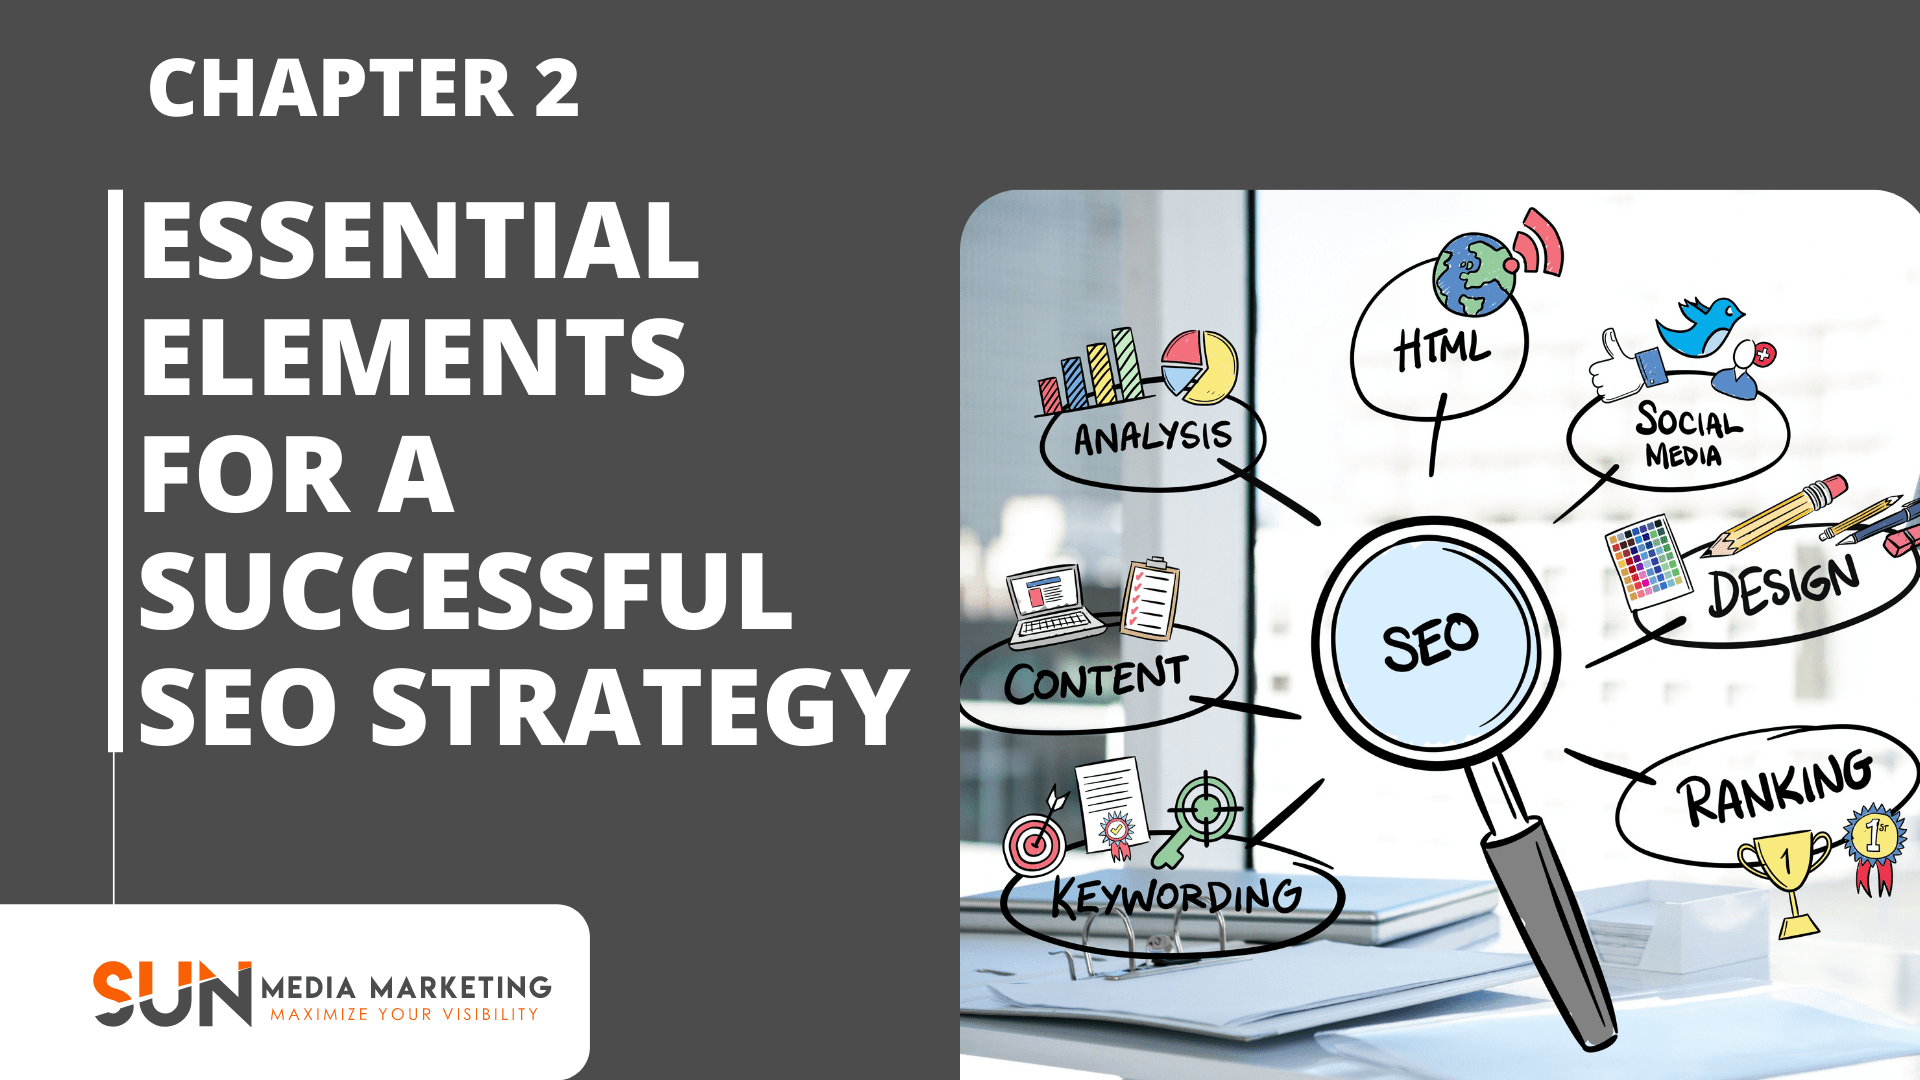 Essential Elements for a Successful SEO Strategy